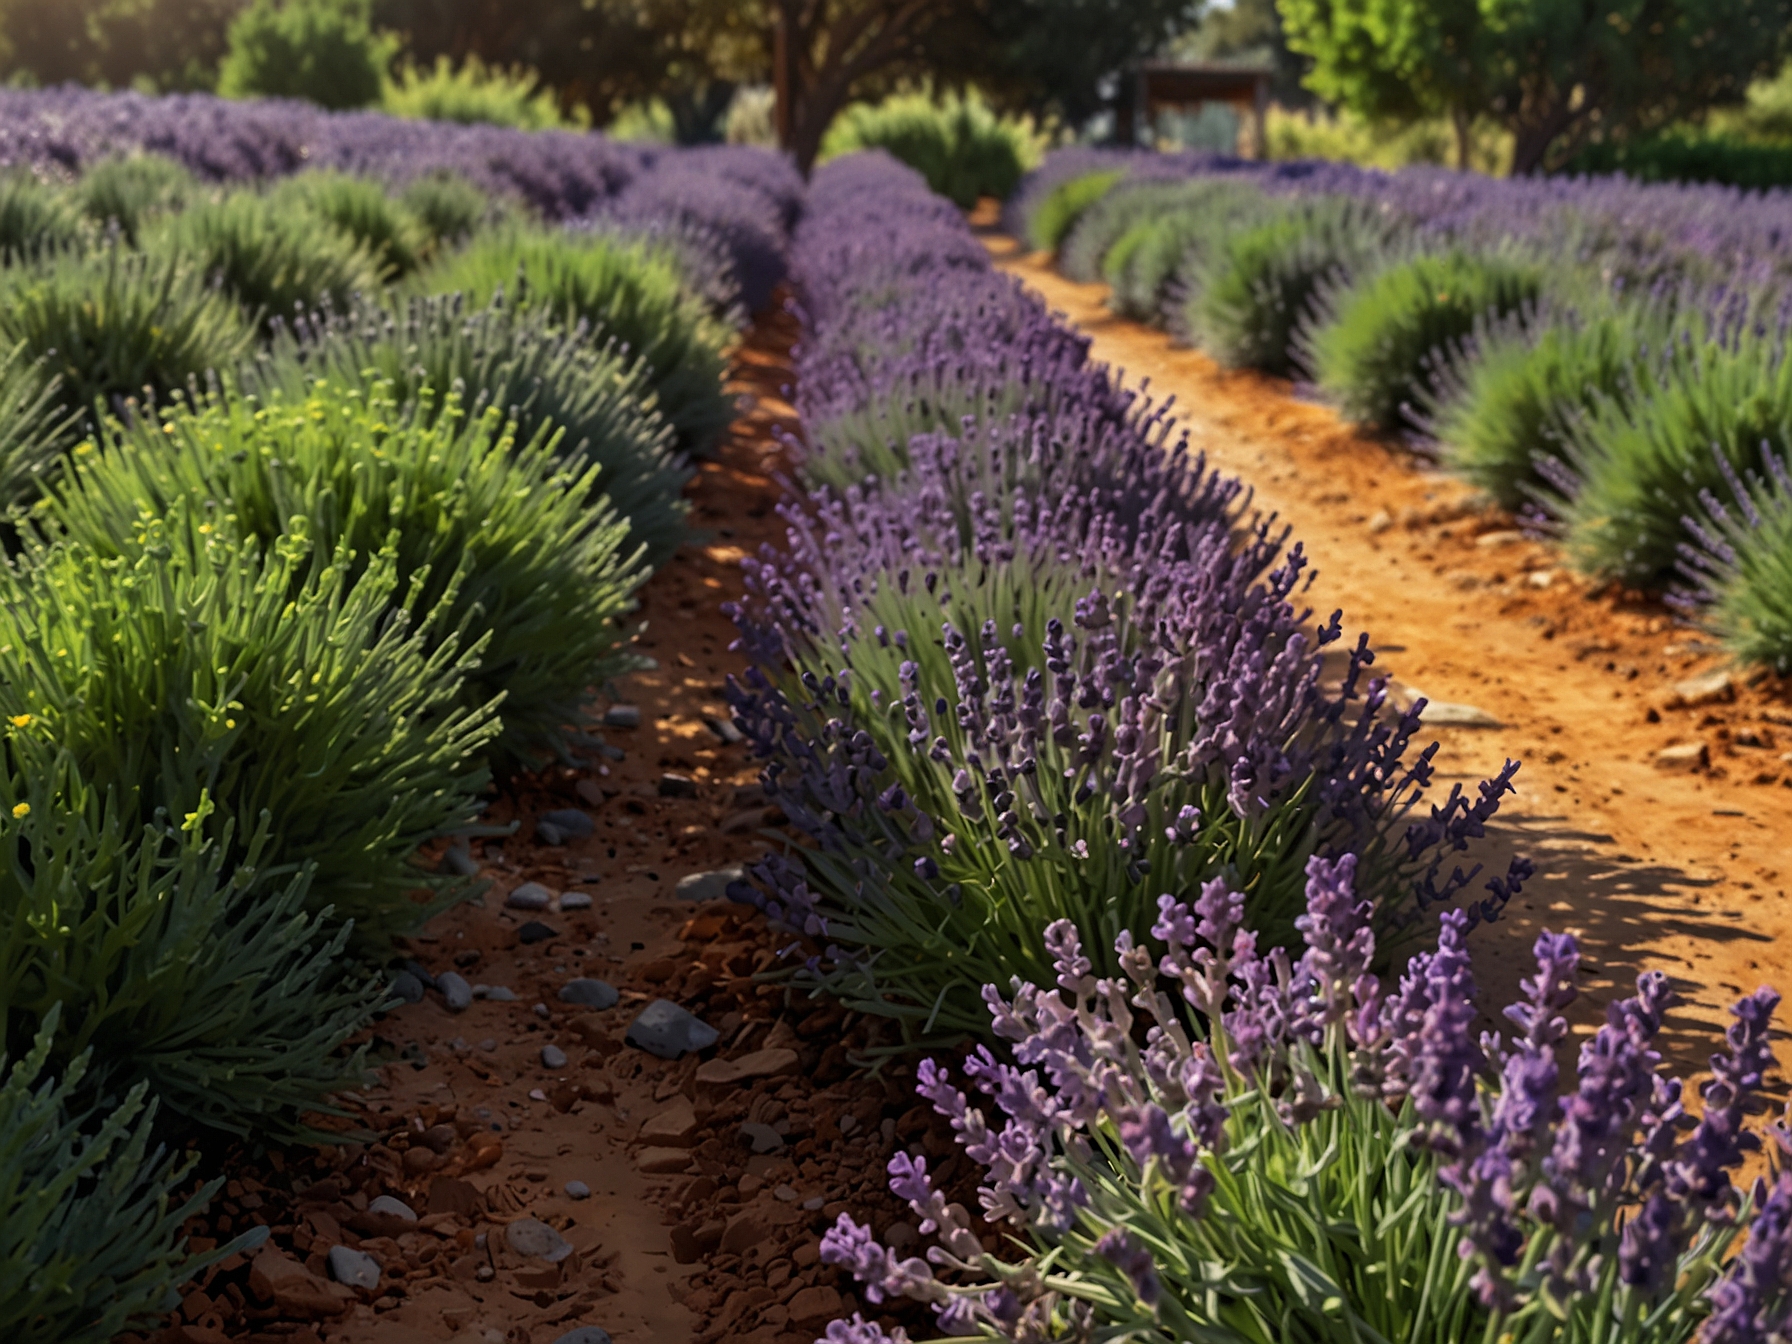 A close-up of healthy, blooming lavender plants basking in full sunlight, illustrating the benefits of proper pruning and care. The plants are vibrant with lush, green foliage and rich purple flowers.